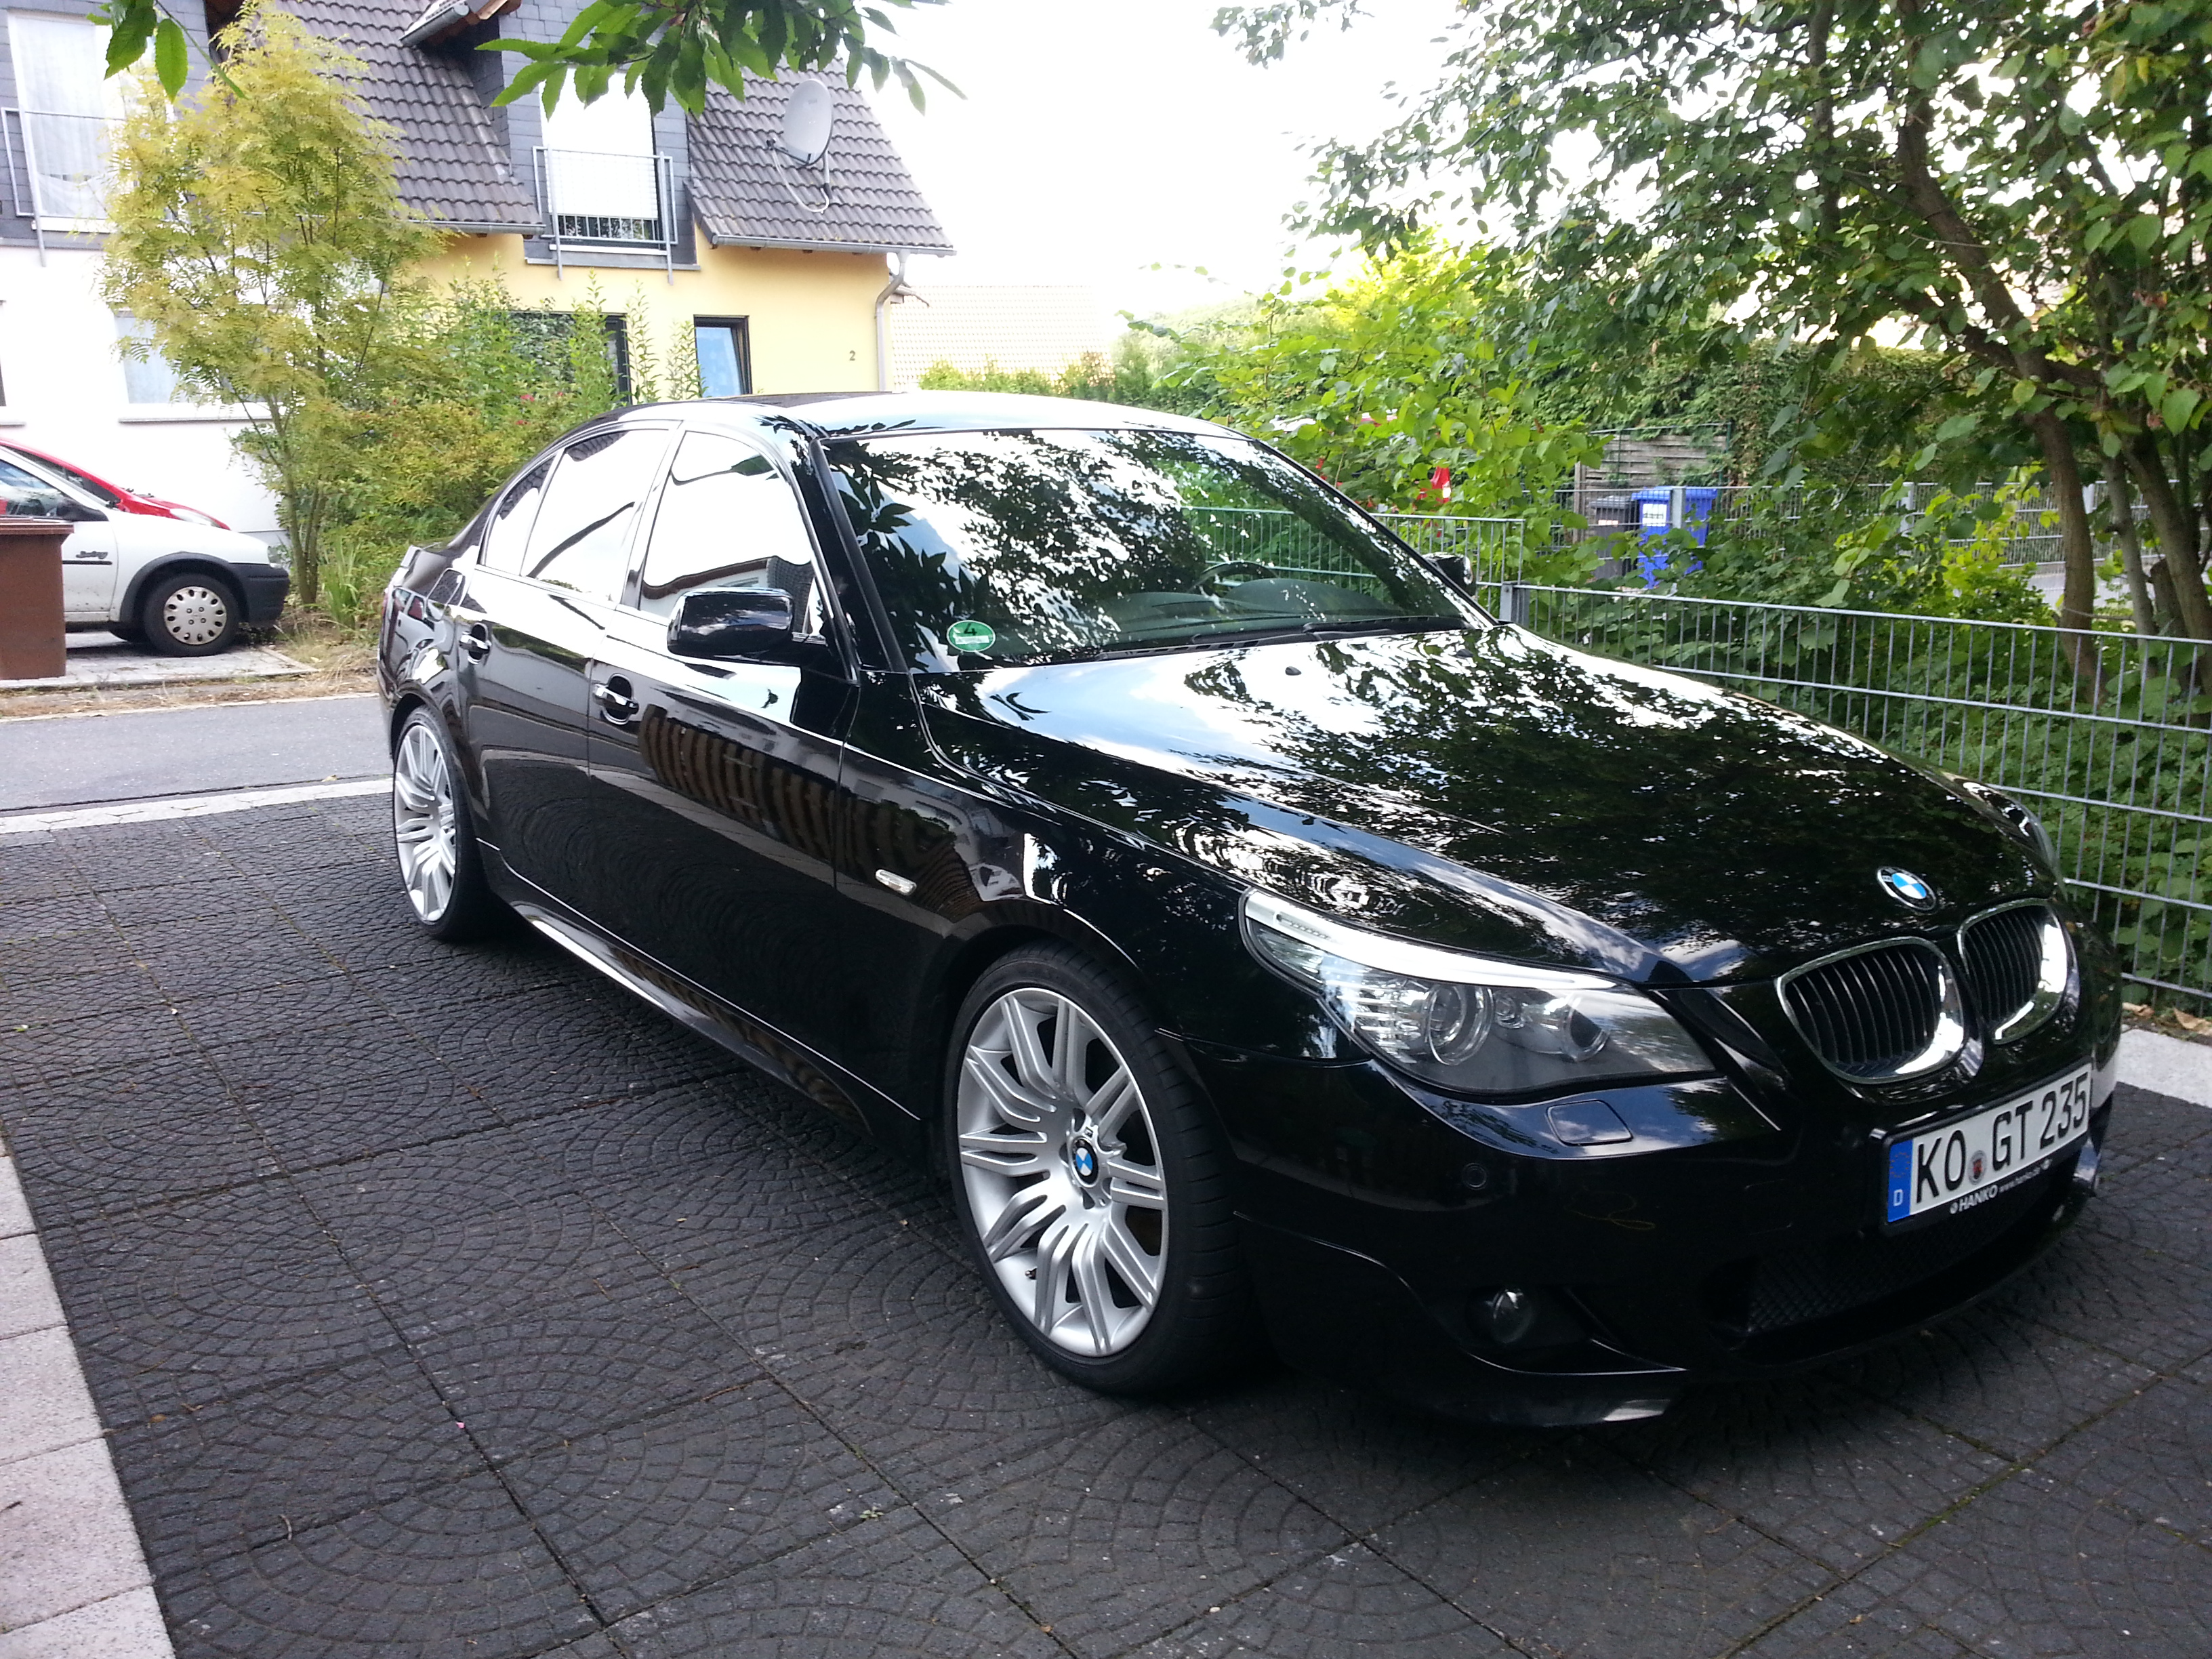 2007 BMW 530d E60 related infomation,specifications